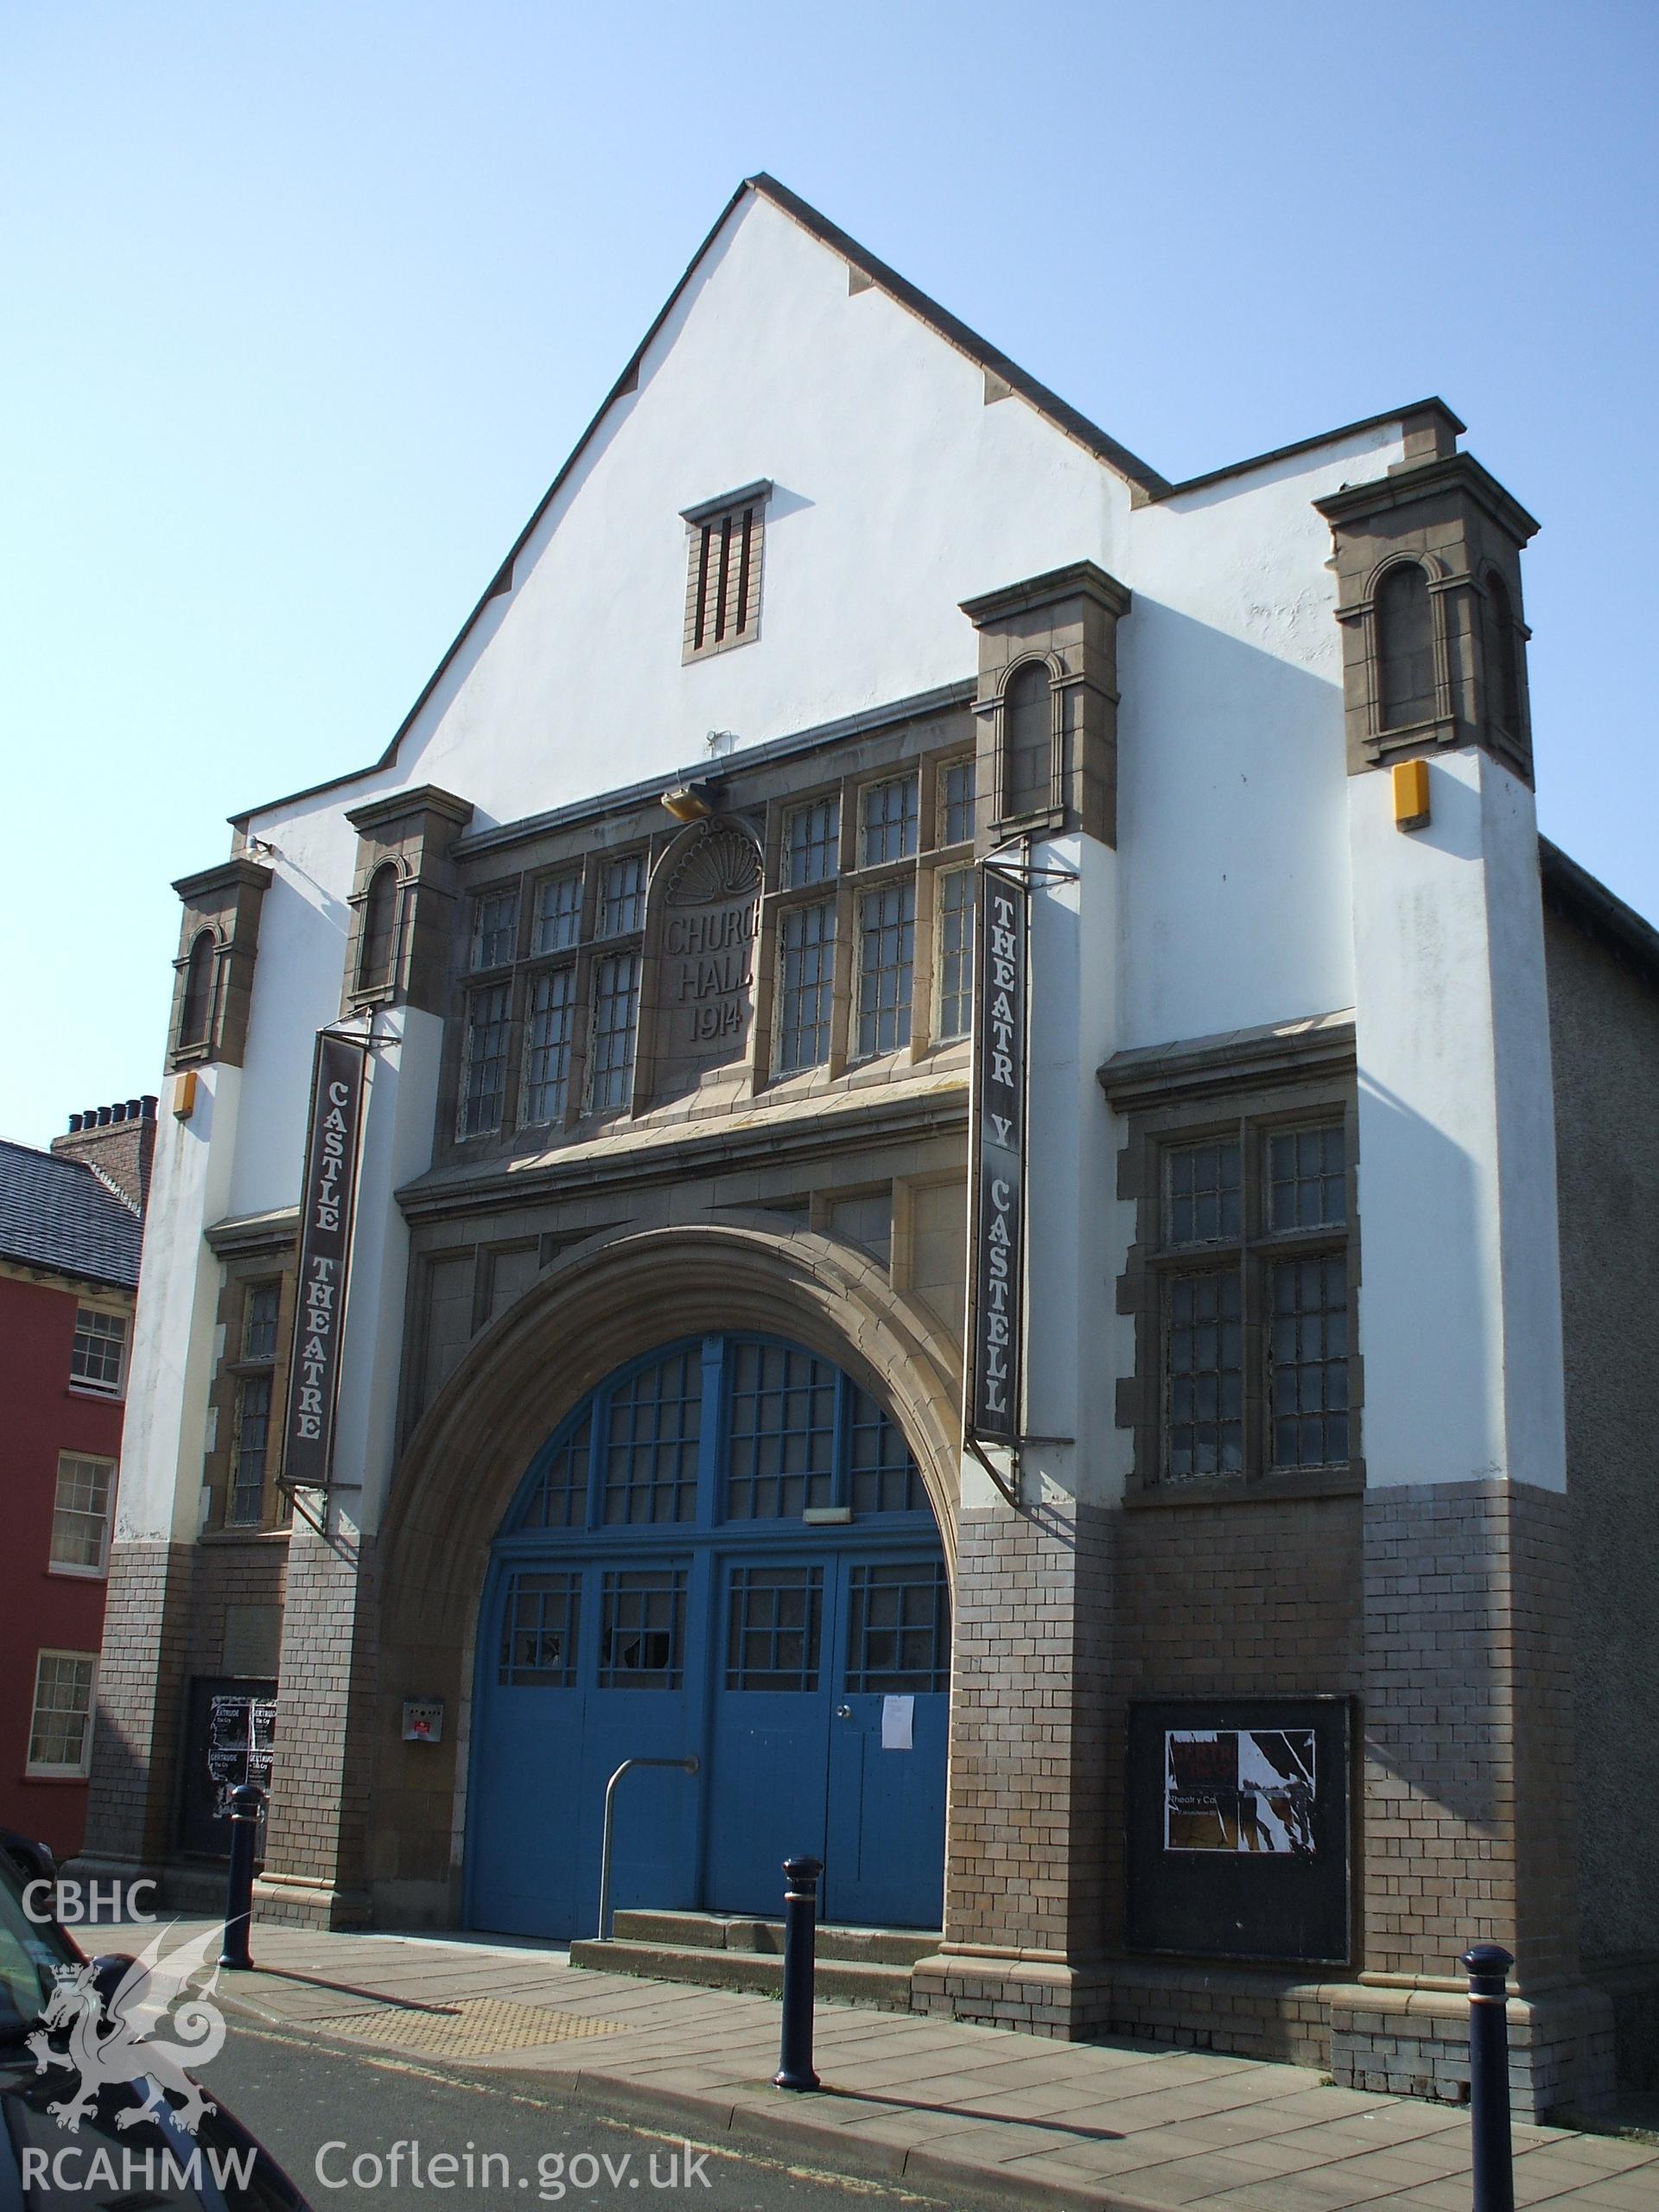 Colour digital photograph showing the exterior of Castle Theatre, parish hall in Aberystwyth.